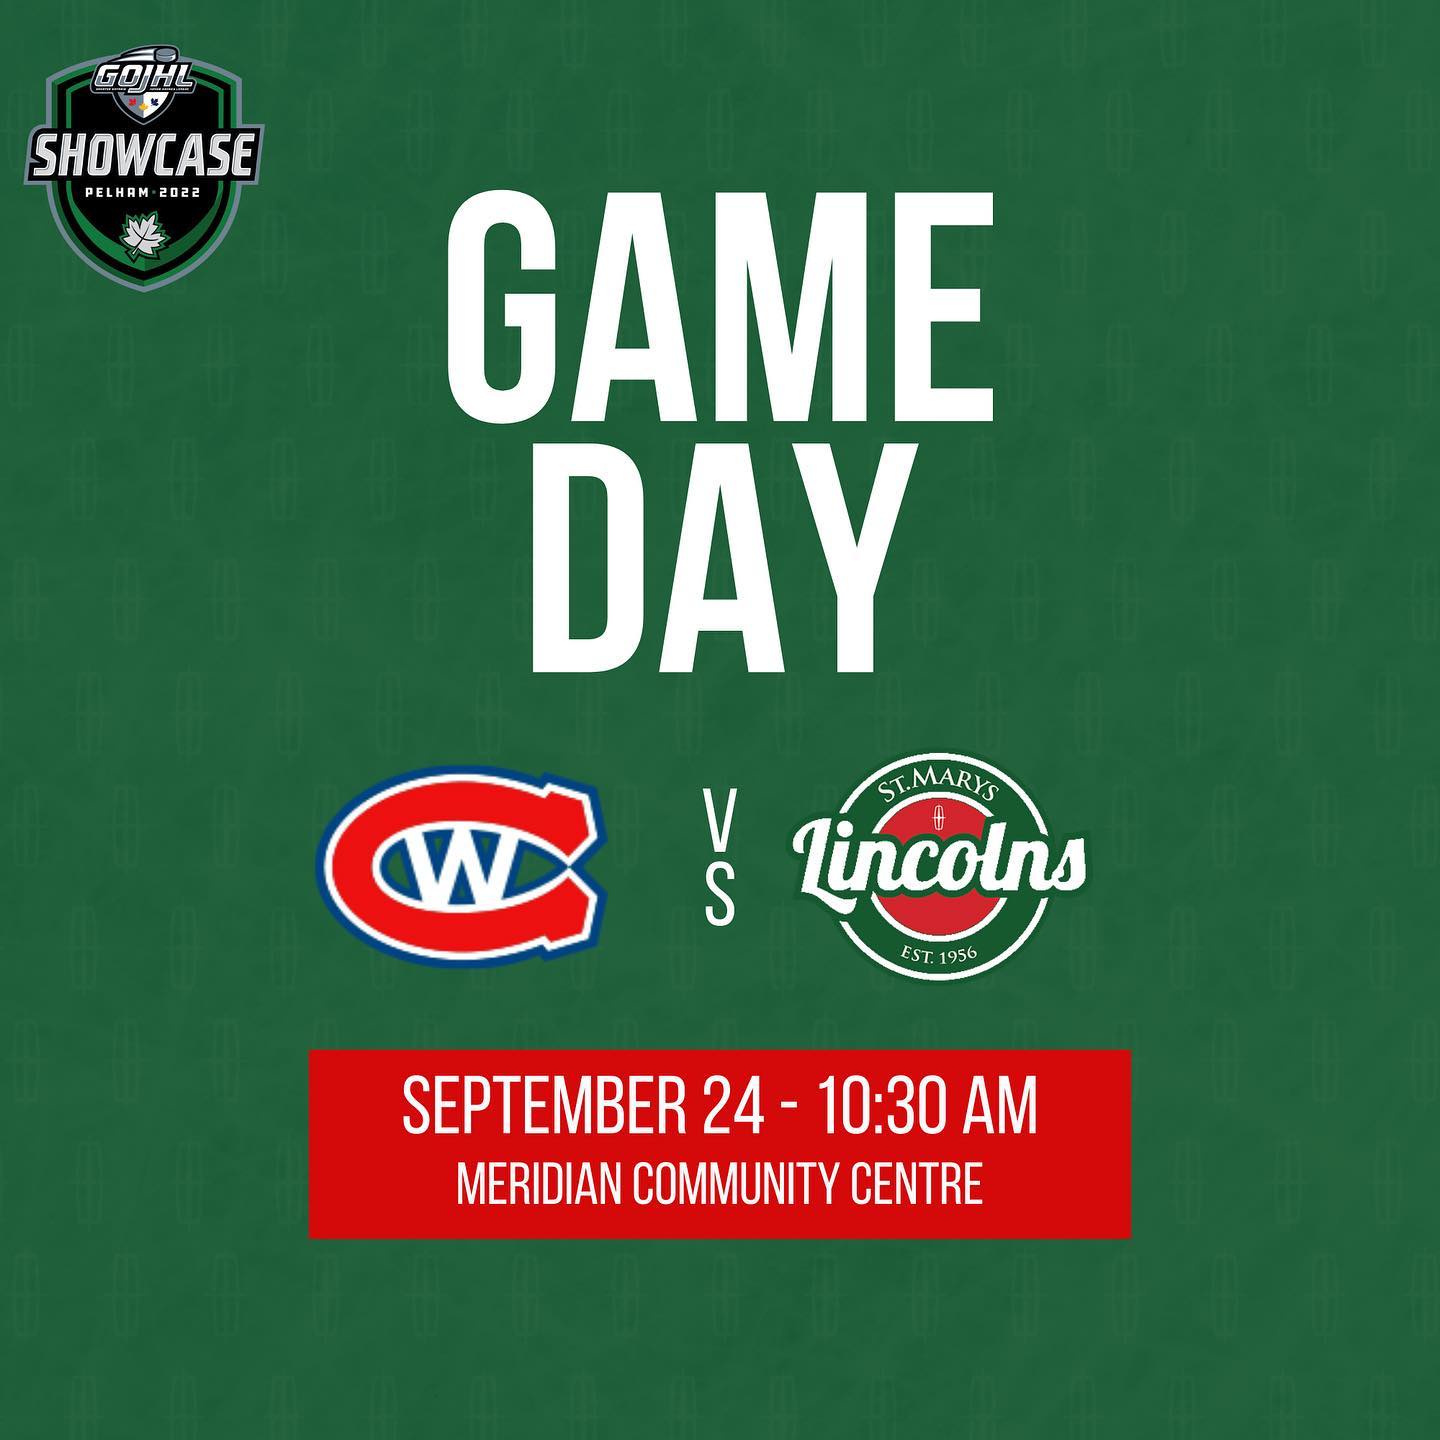 GAME DAY - Lincs face the Welland Jr Canadians today at the GOJHL Showcase! Listen live with St. Marys Radio #GoLincsGo